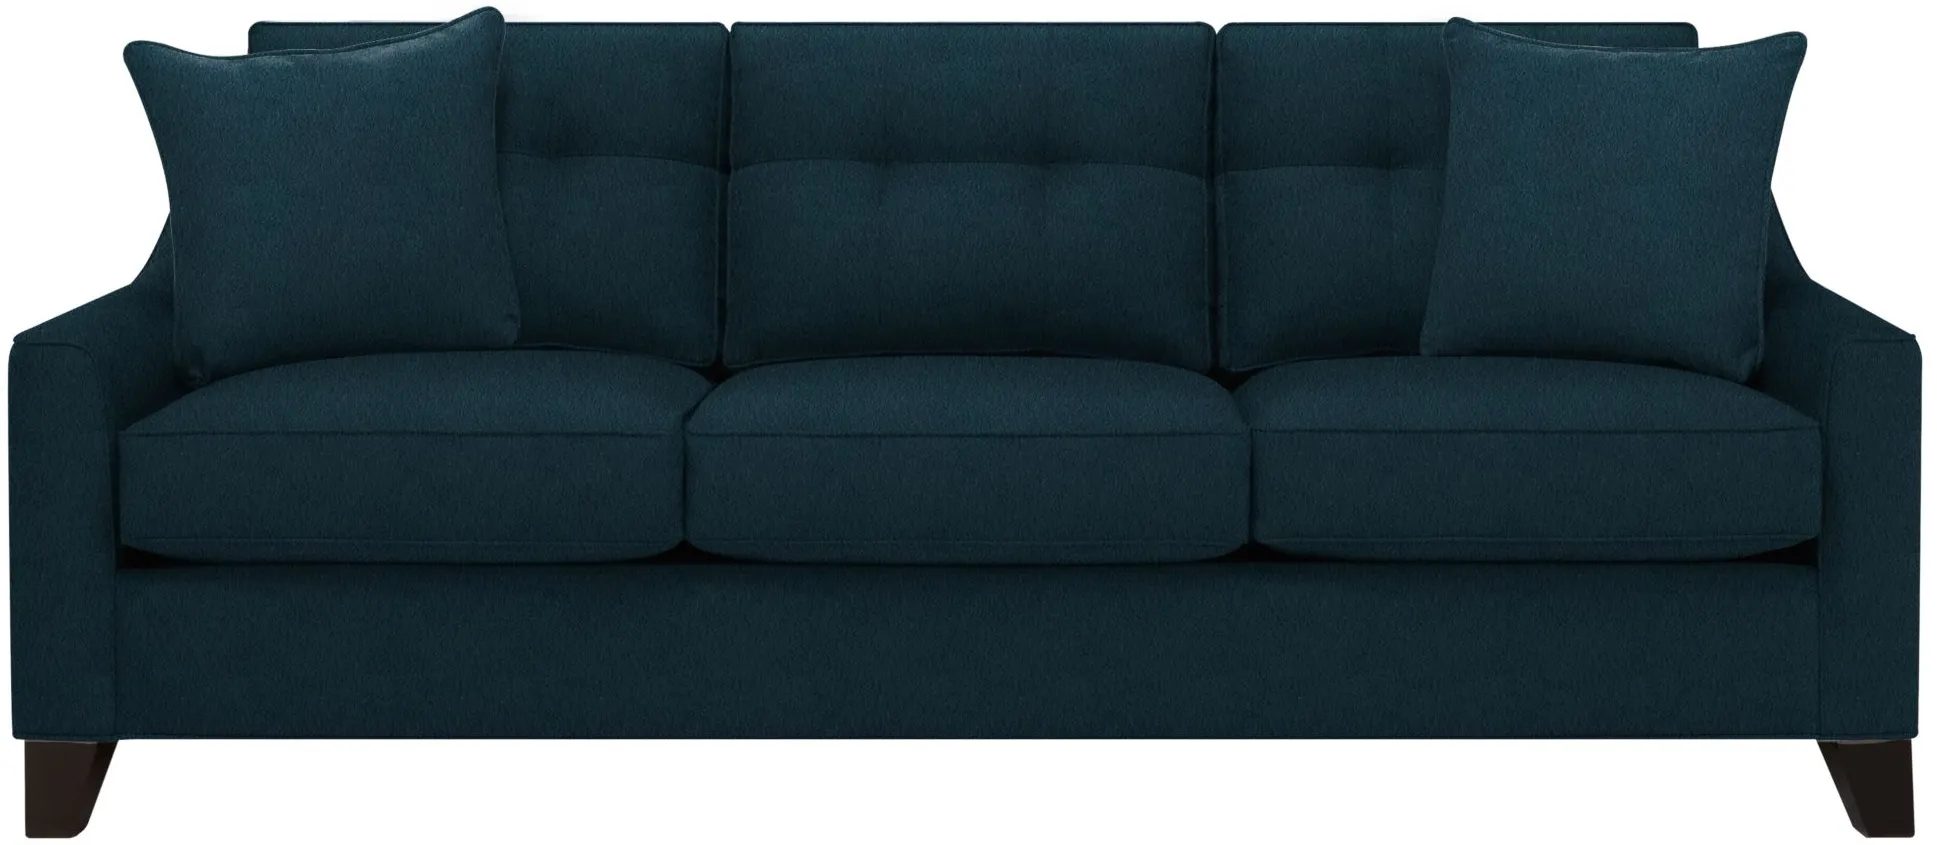 Carmine Sofa in Suede So Soft Midnight by H.M. Richards